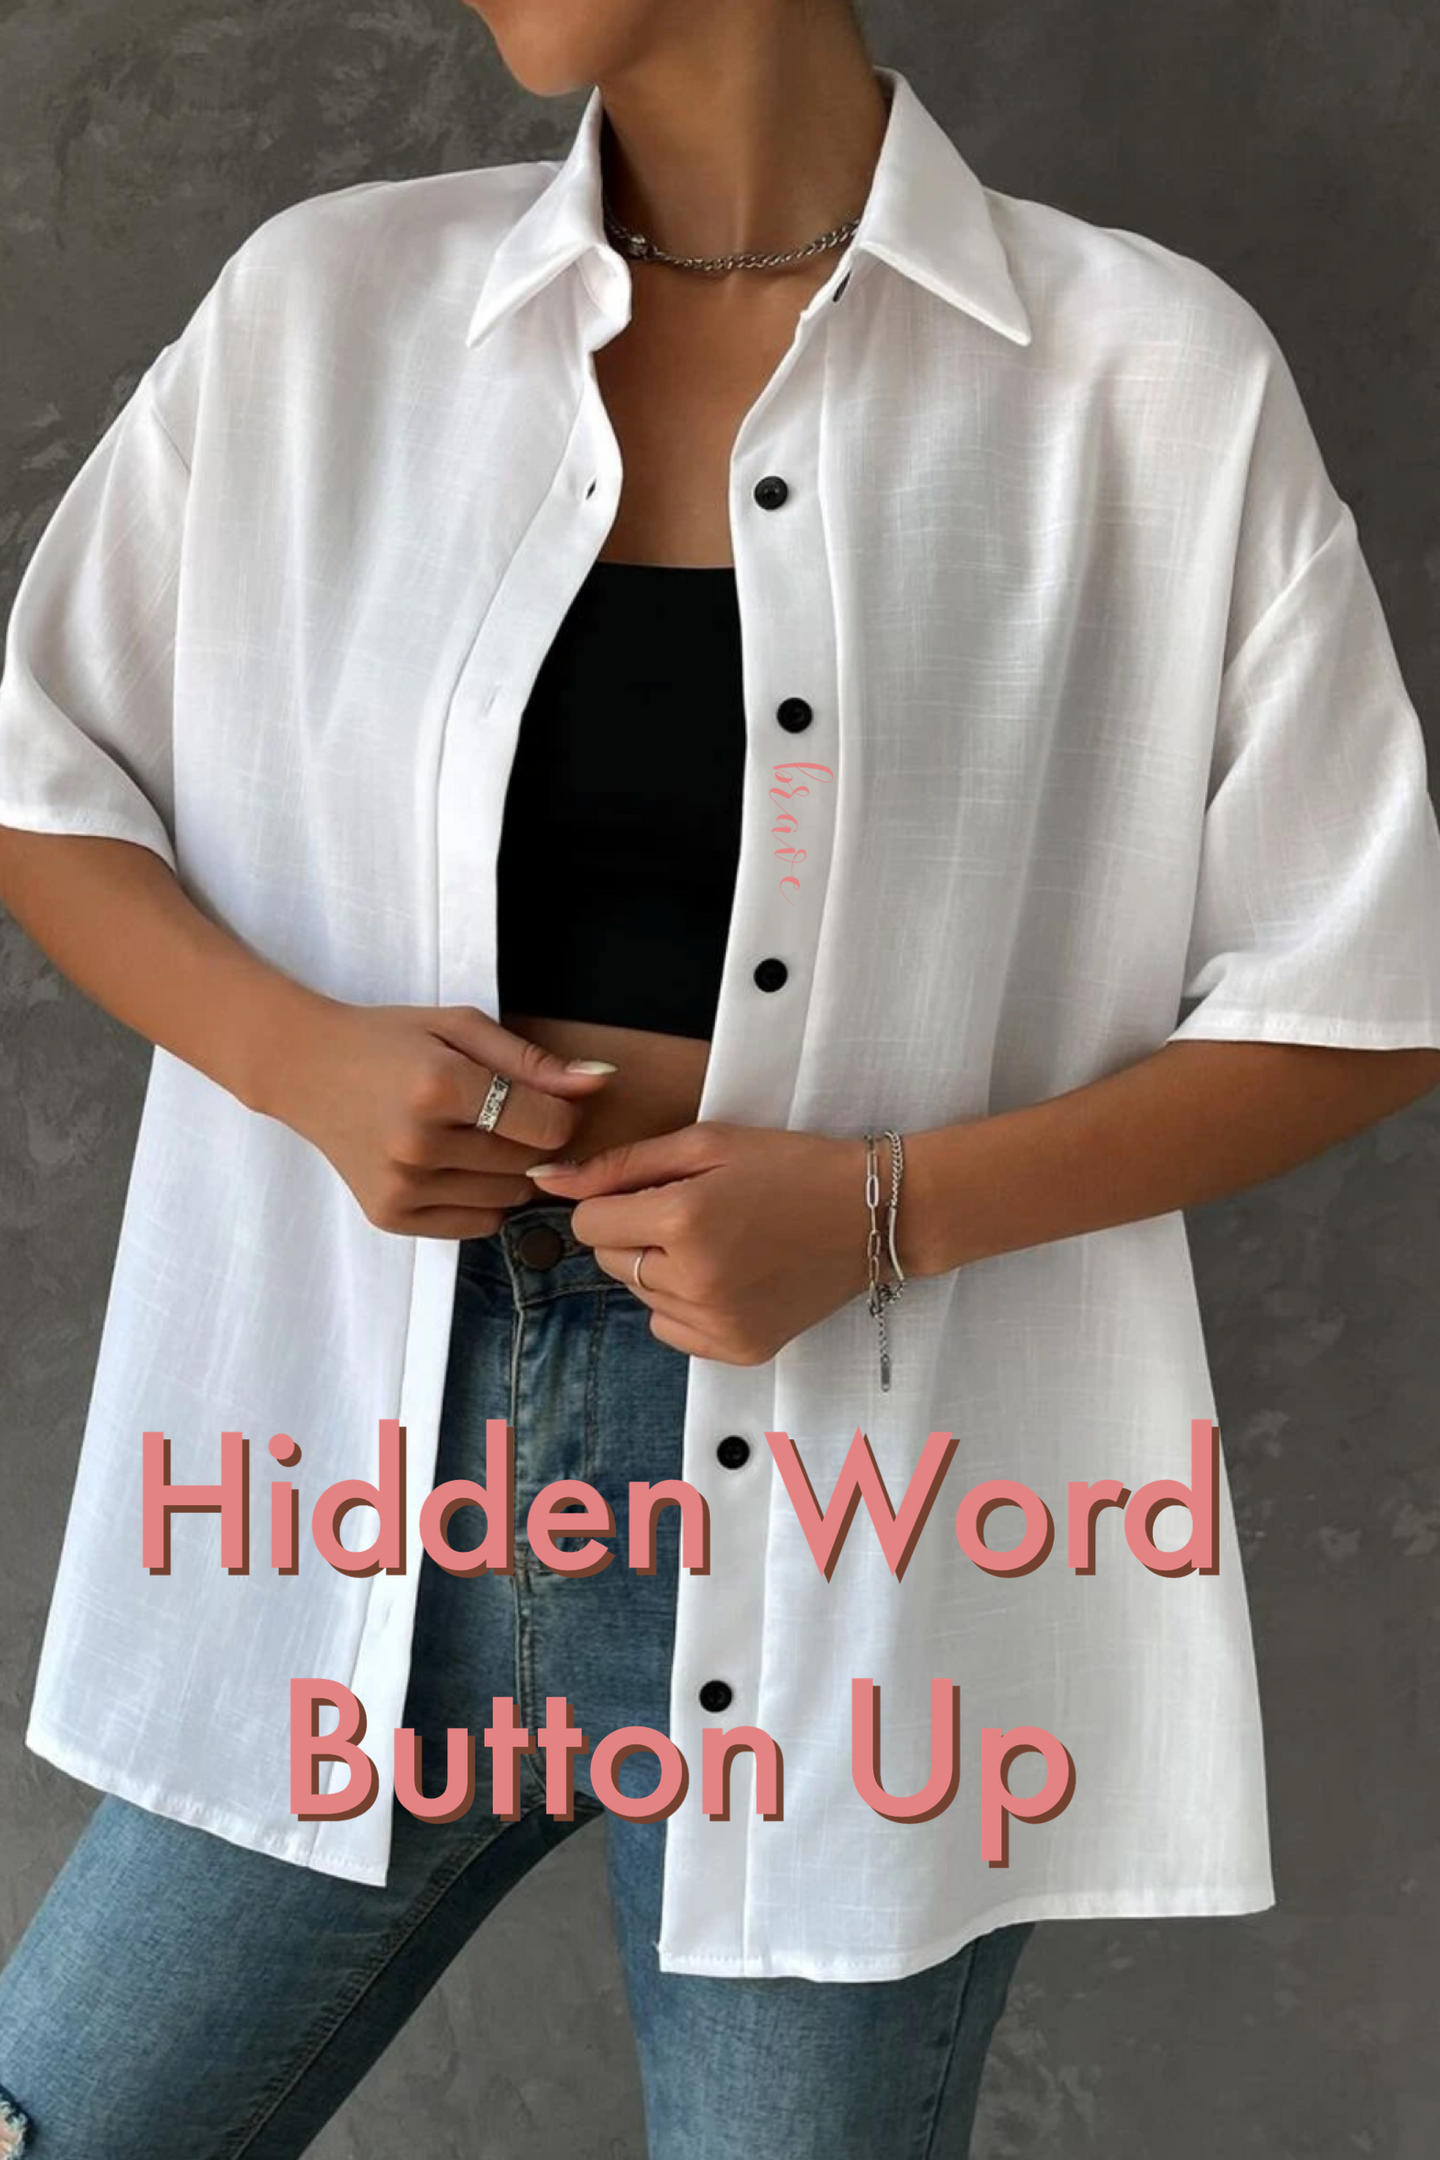 Button Up Blouse with Hidden Embroidered Word